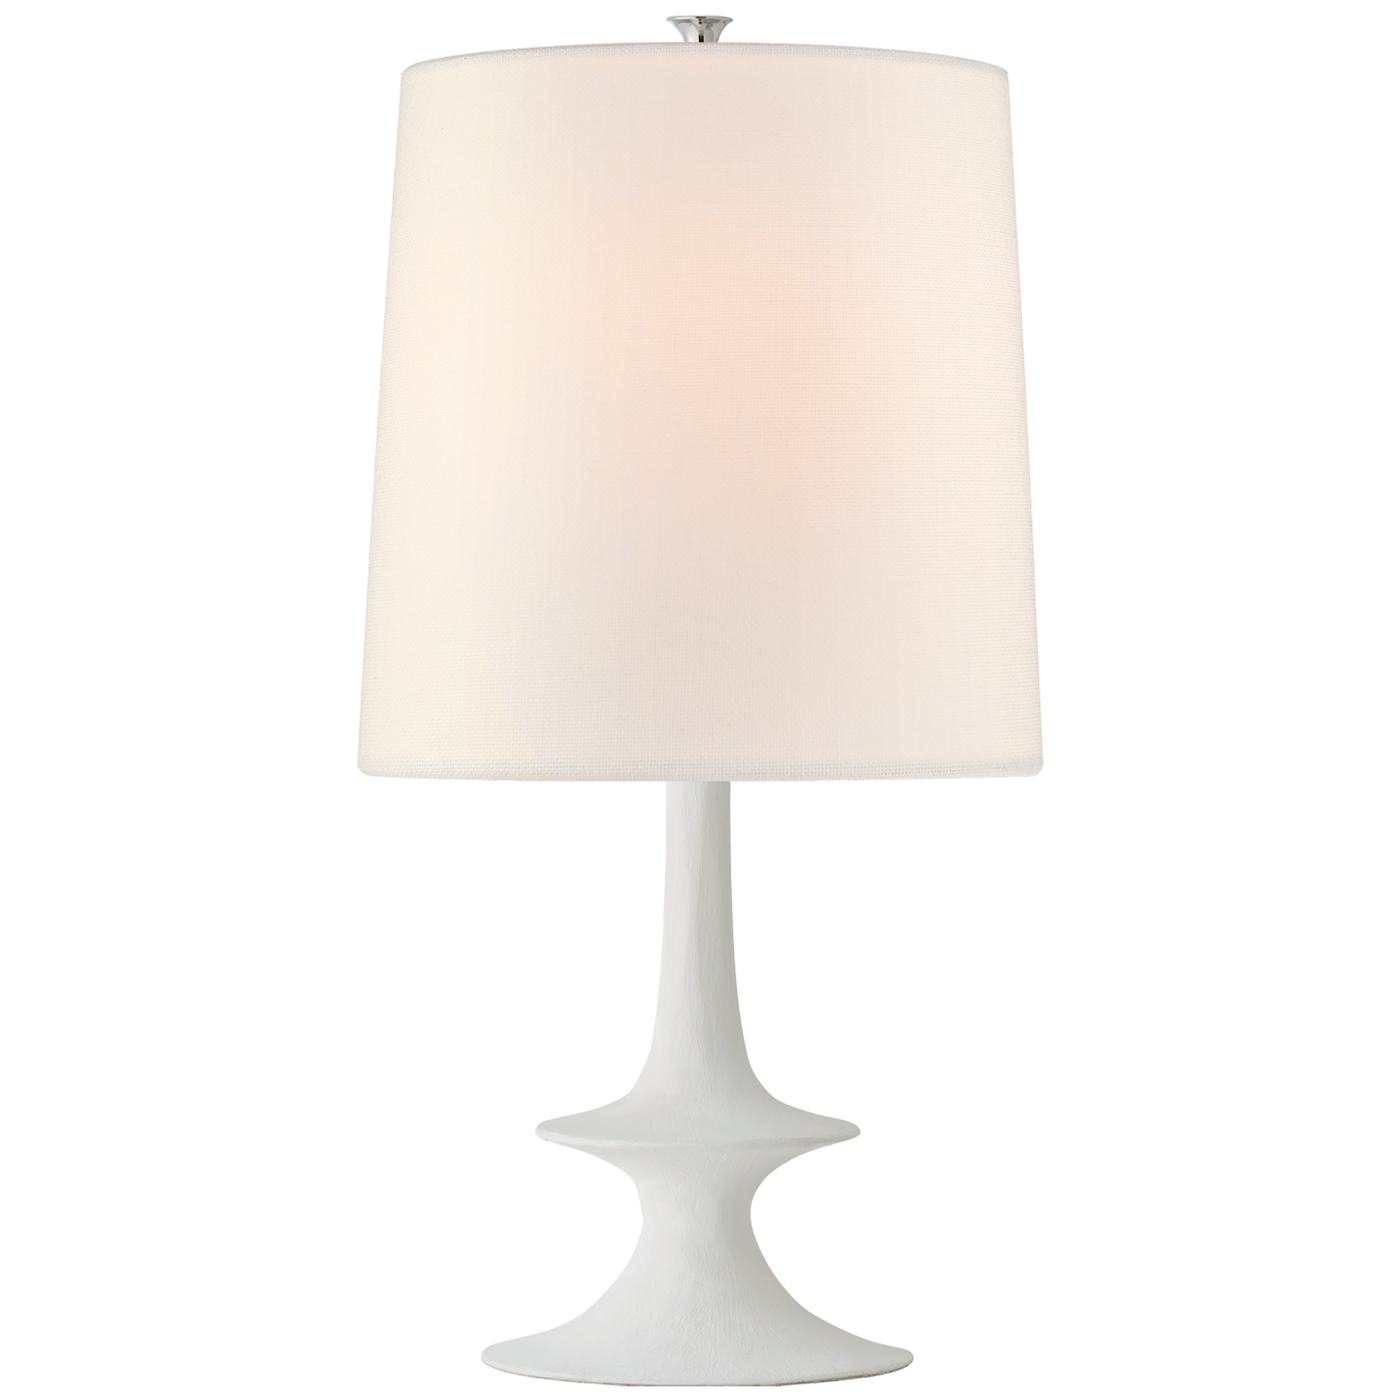 TABLE LAMP LINEN SHADE MEDIUM (Available in 2 Finishes)